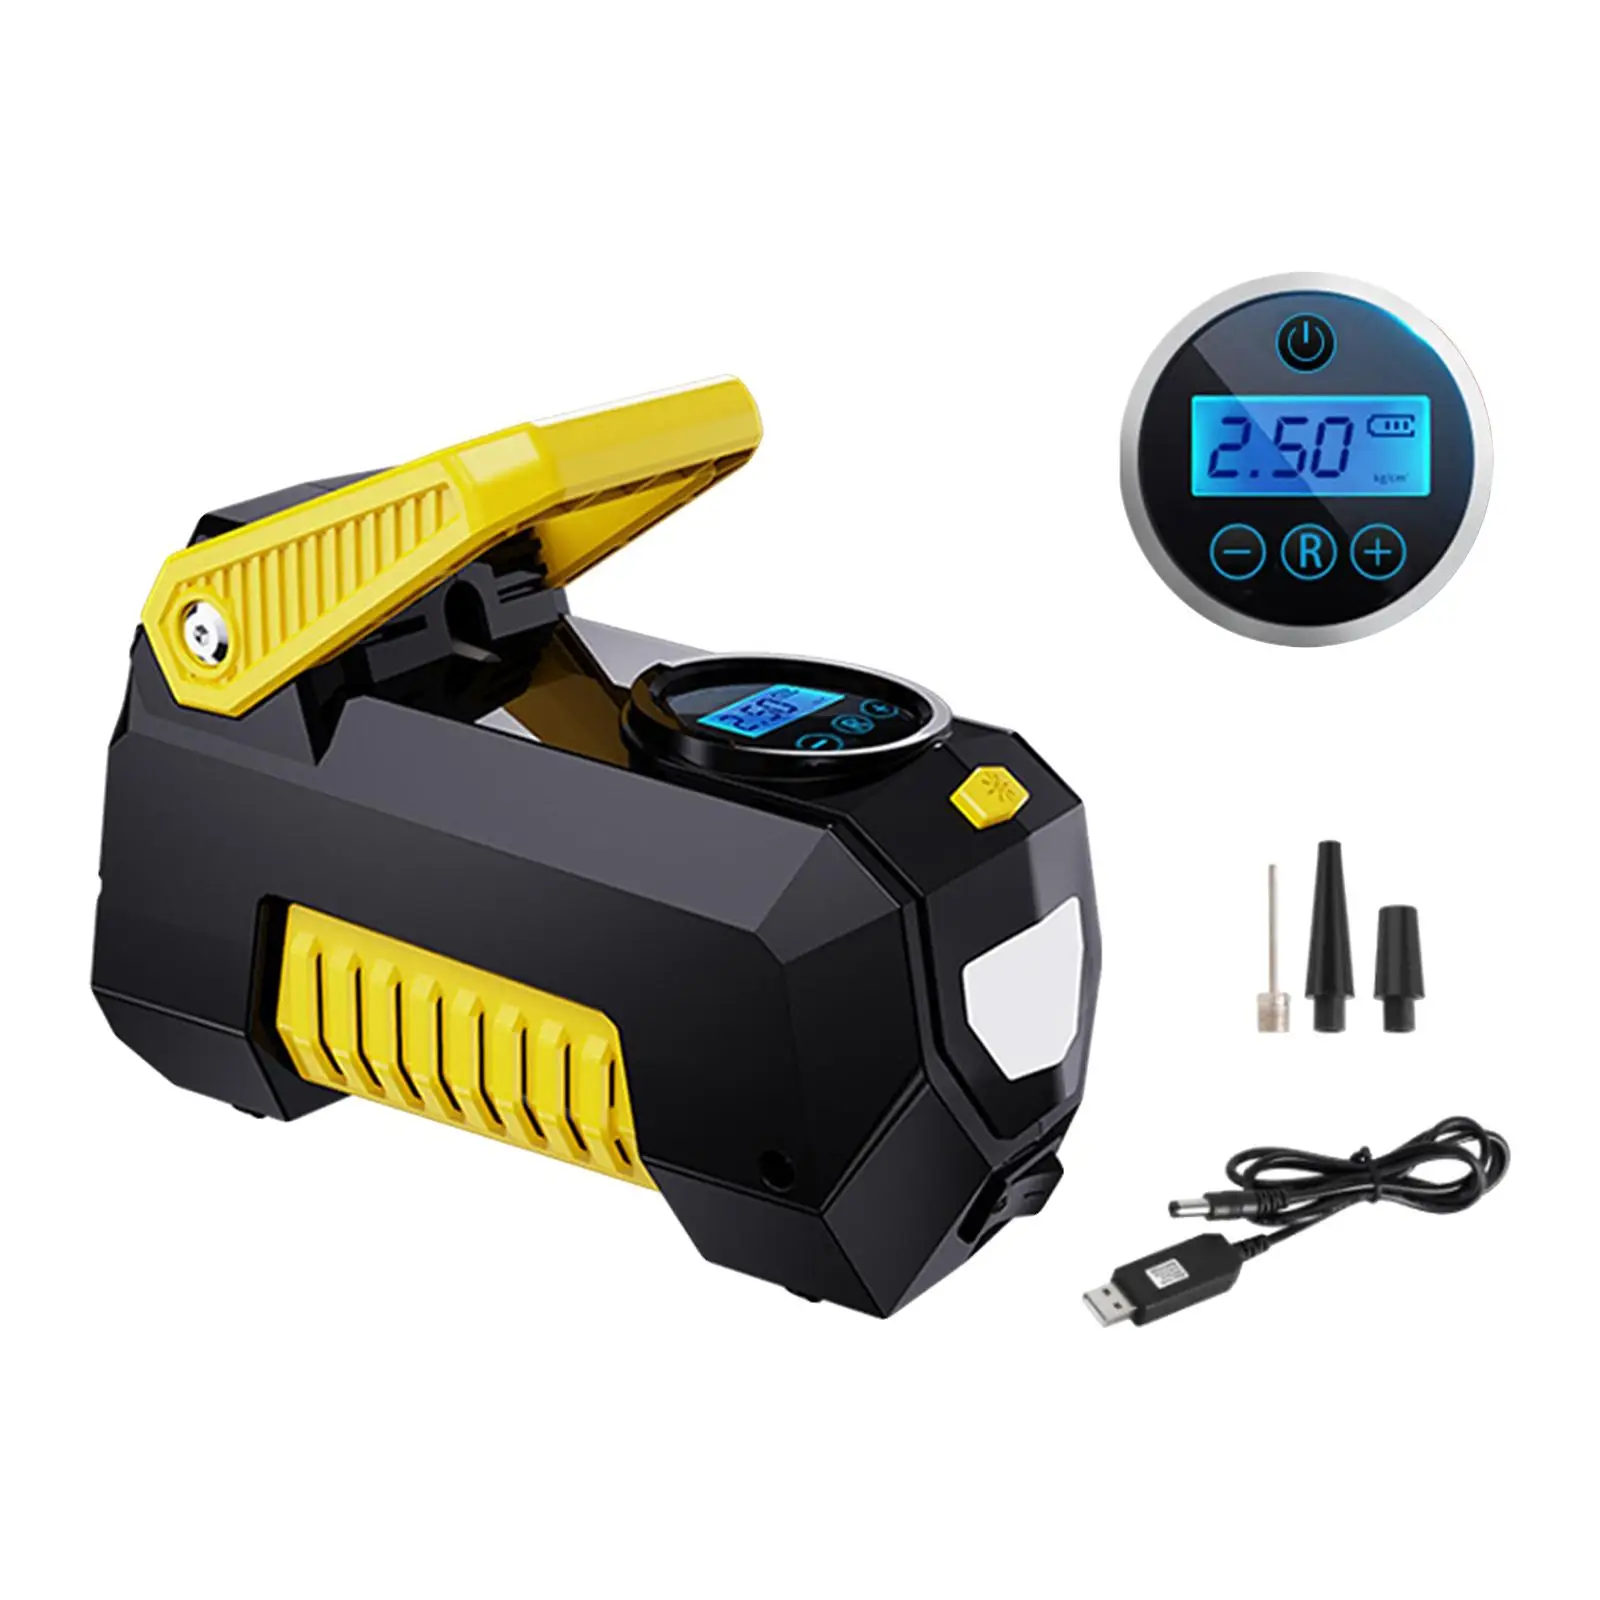 Car Air Pump Cordless Portable Fit for Other Car Tires